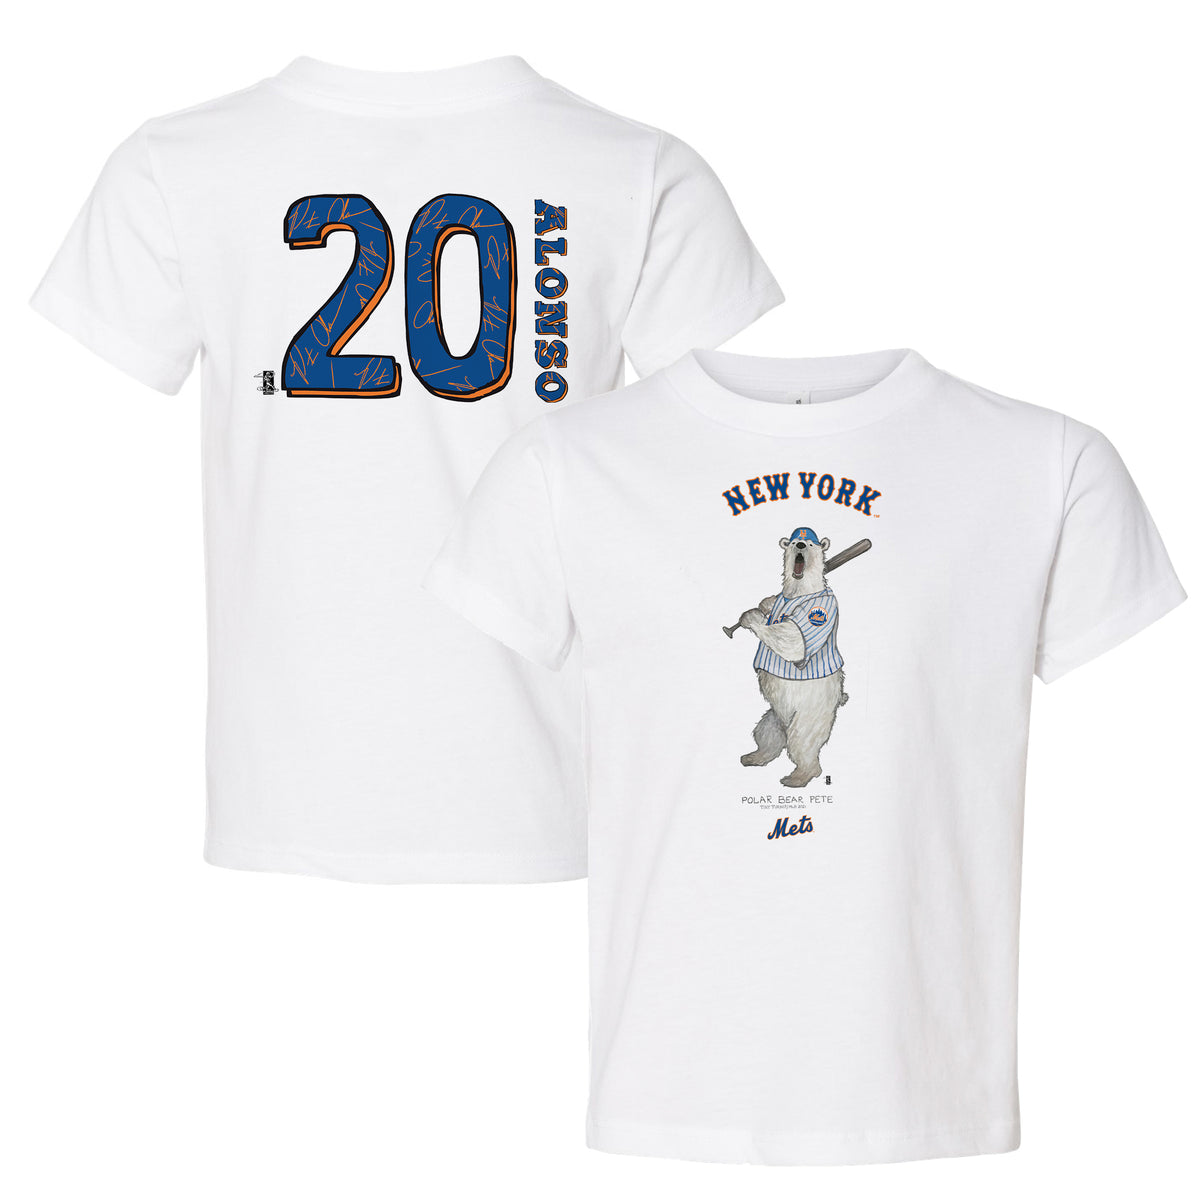 Lids Tampa Bay Rays Tiny Turnip Girls Toddler Kate the Catcher